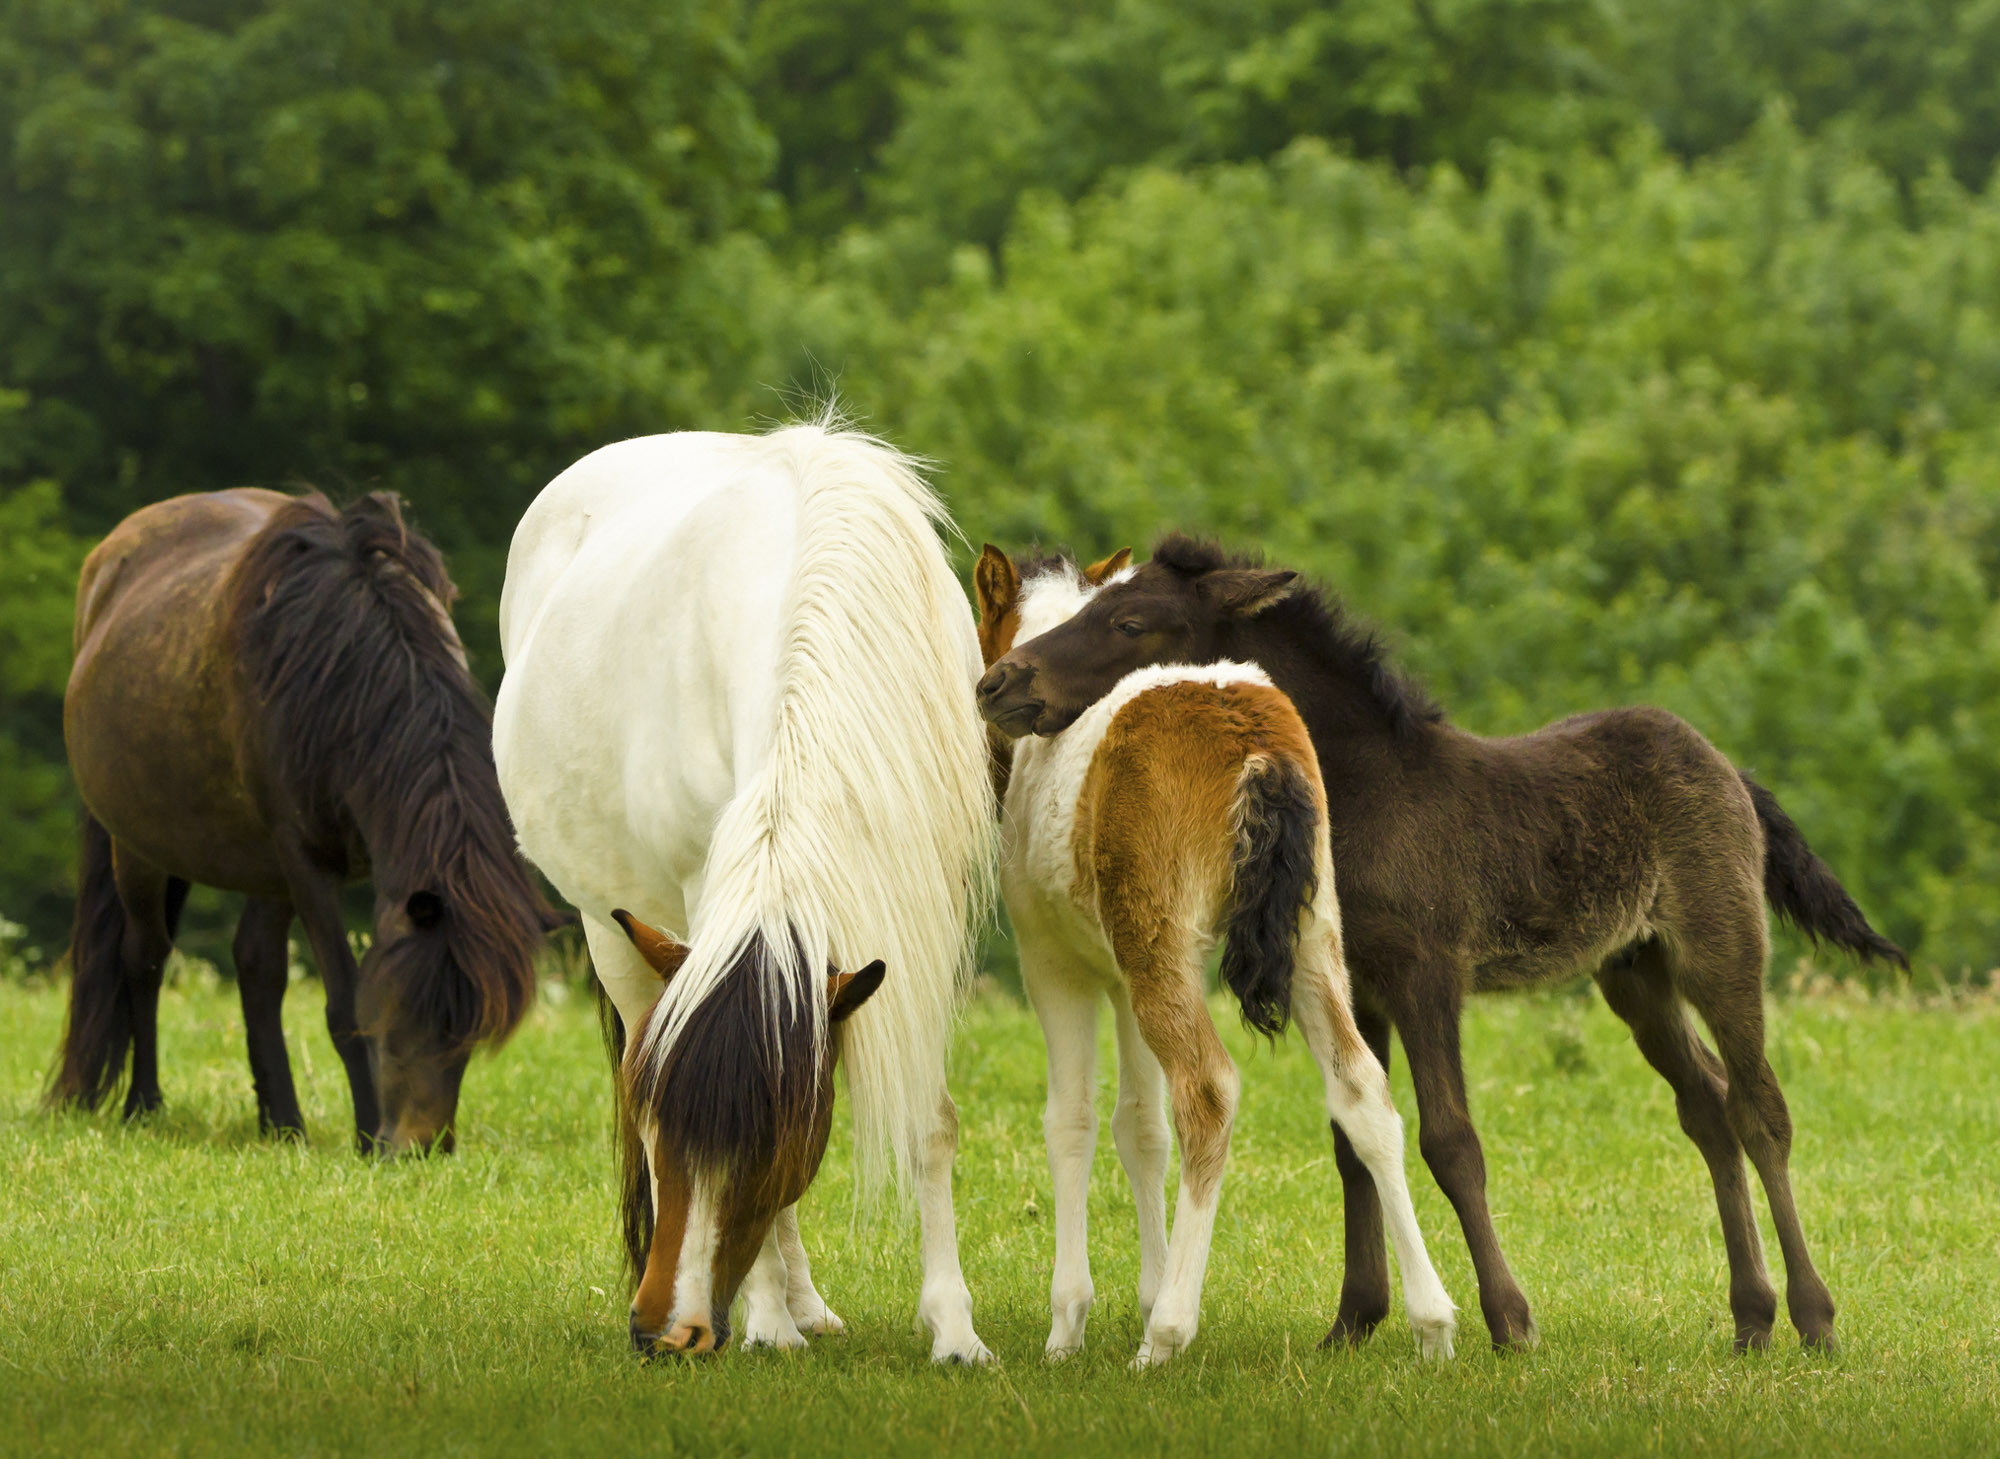 A Black Foal And A Skewbald Foal Are Playing Together And Are Grooming Together And Playing Near Their Mothers